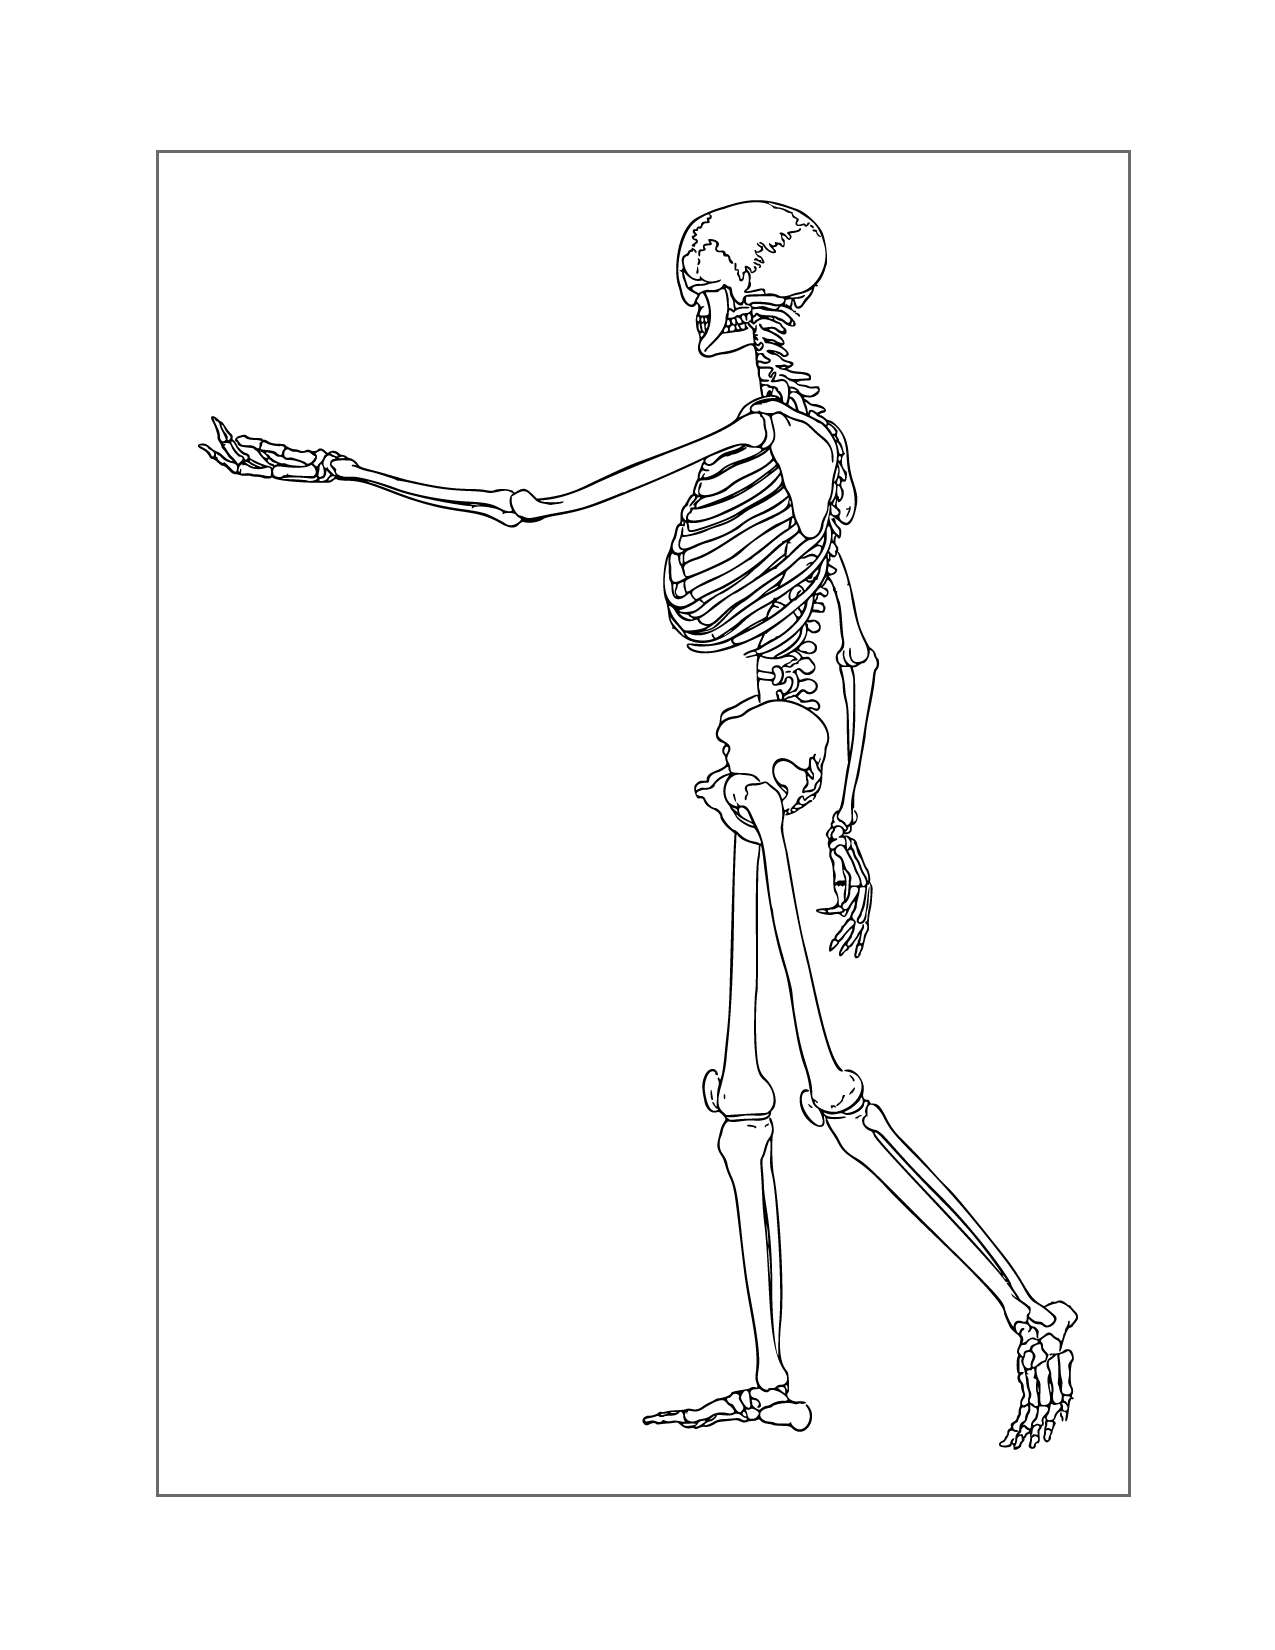 Skeleton Reaching Out Coloring Page